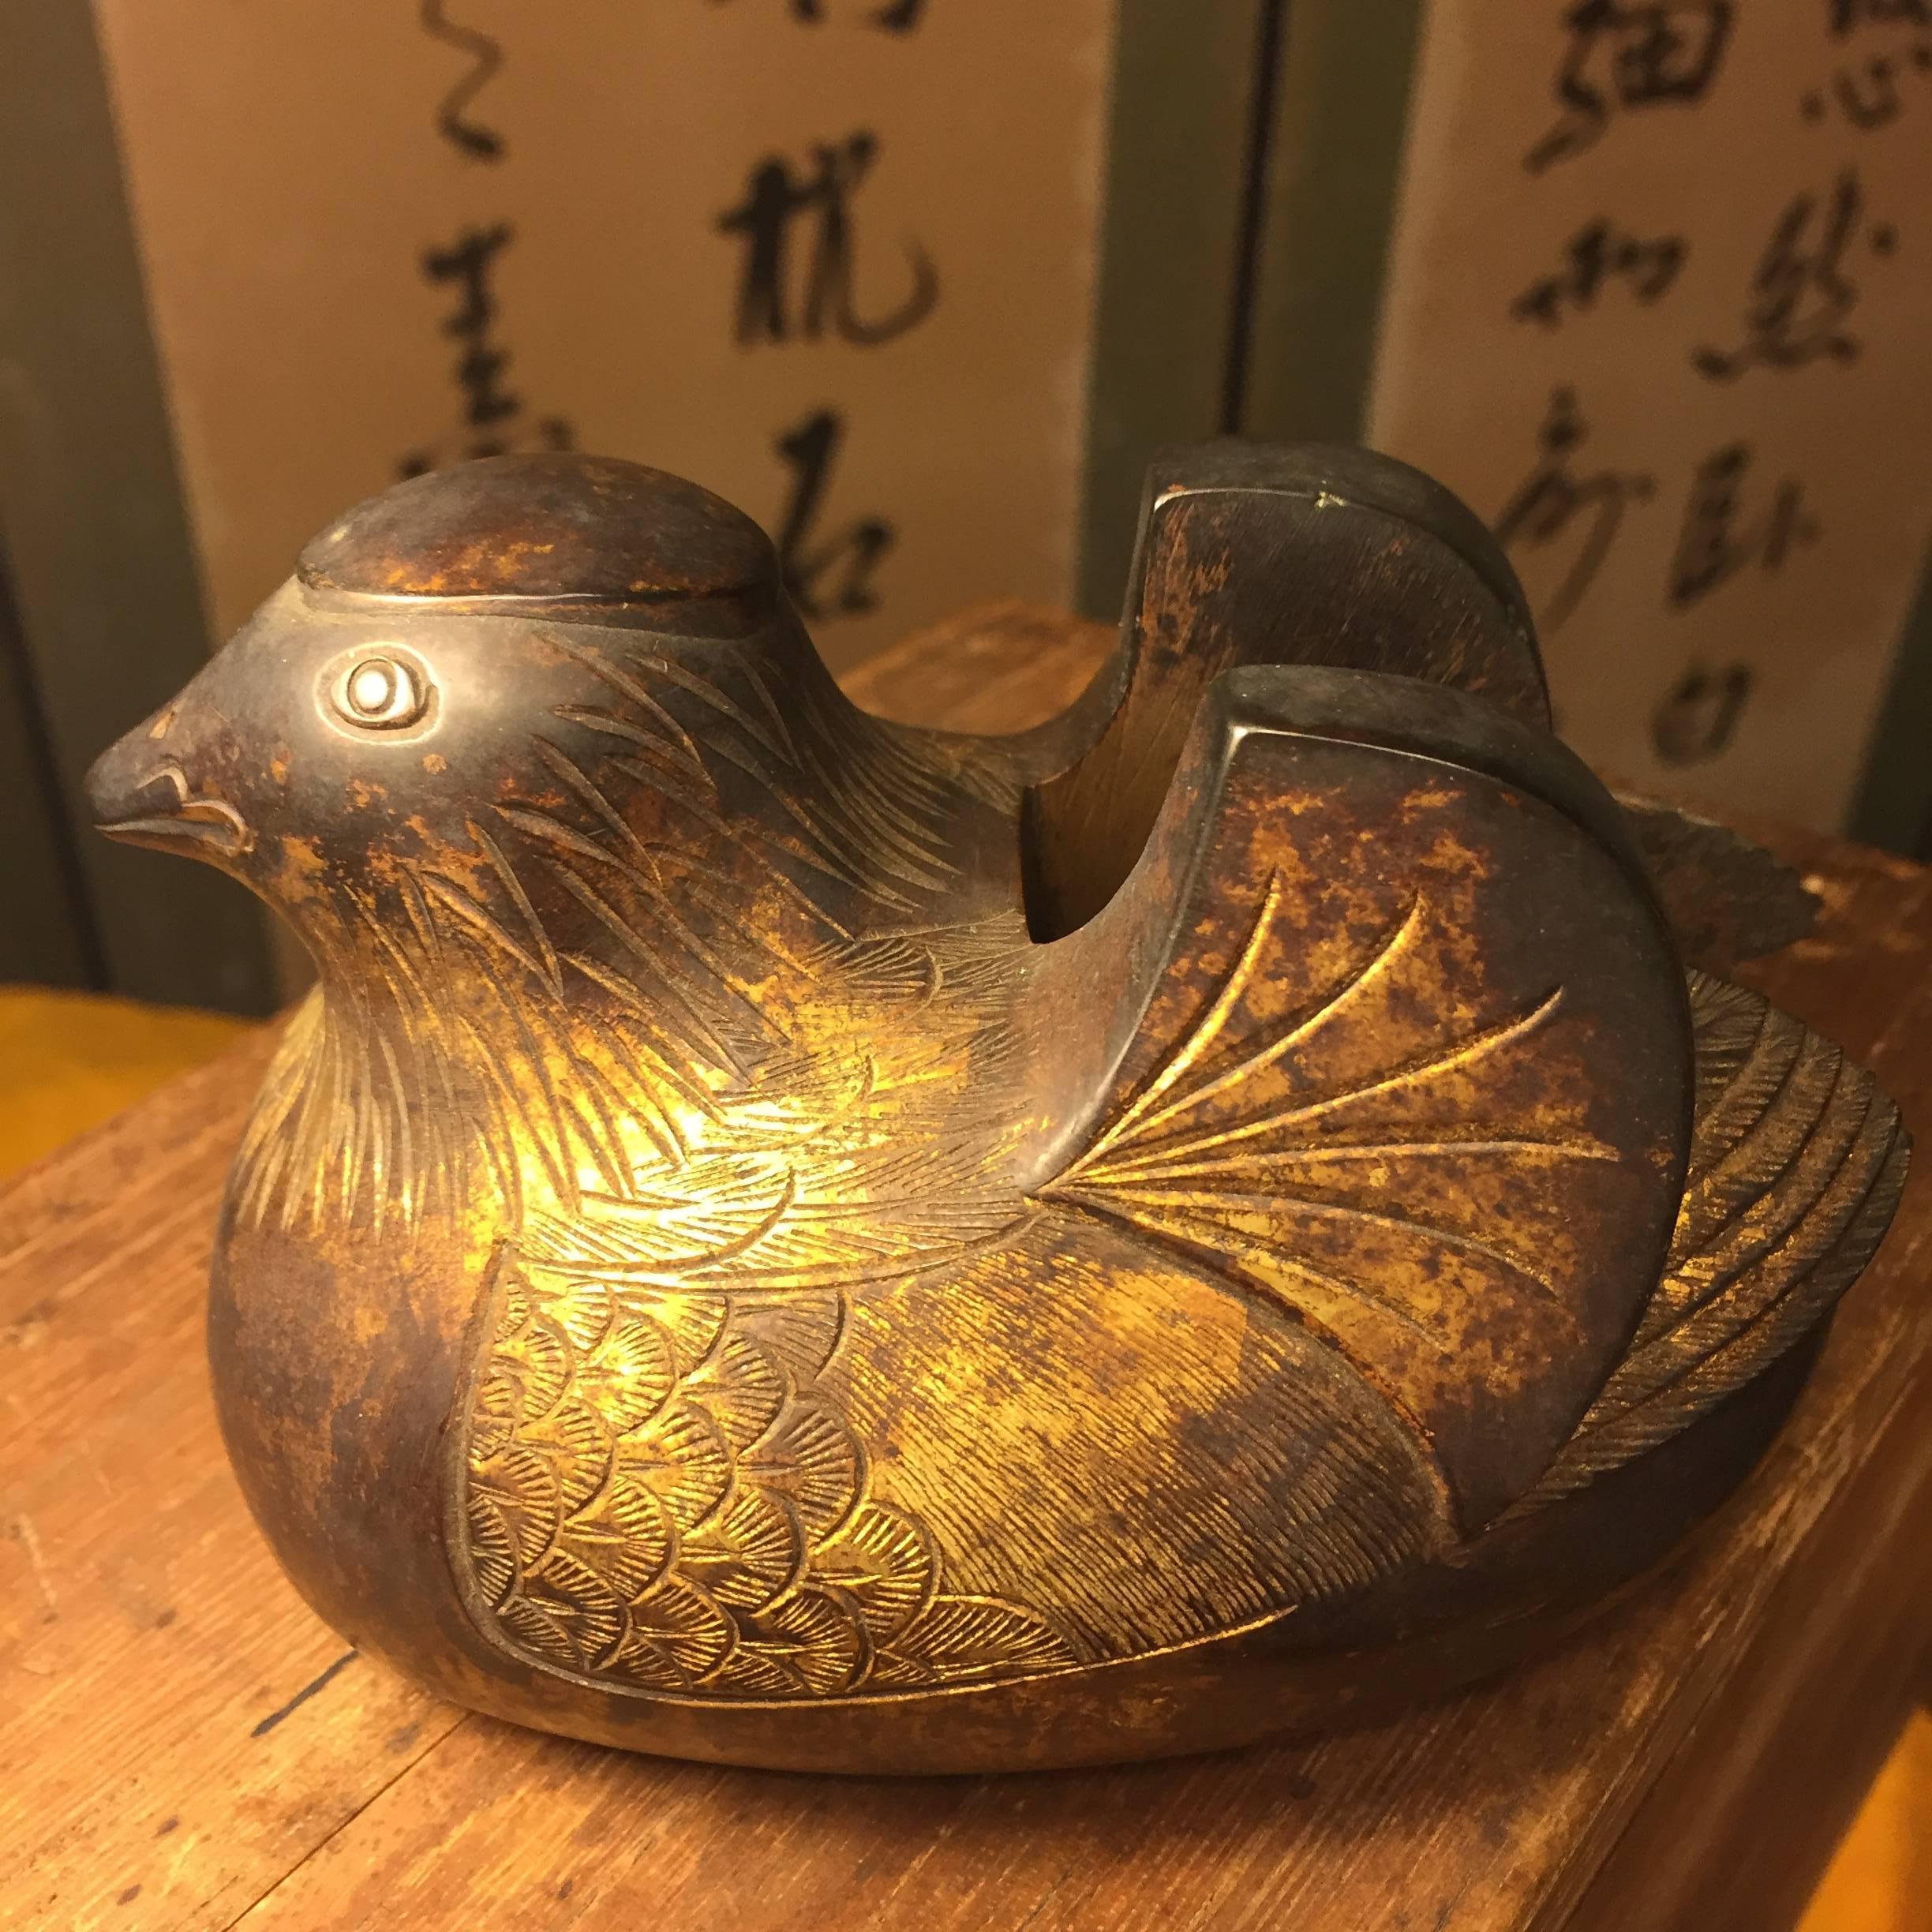 A fine pair of Japanese hand cast gold gilt bronze Mandarin Duck screen holders with highly detailed plumage, late Meiji period 19th century.

An original signed wooden box tomobako is included. 

Each of these two sculptures are in remarkably very